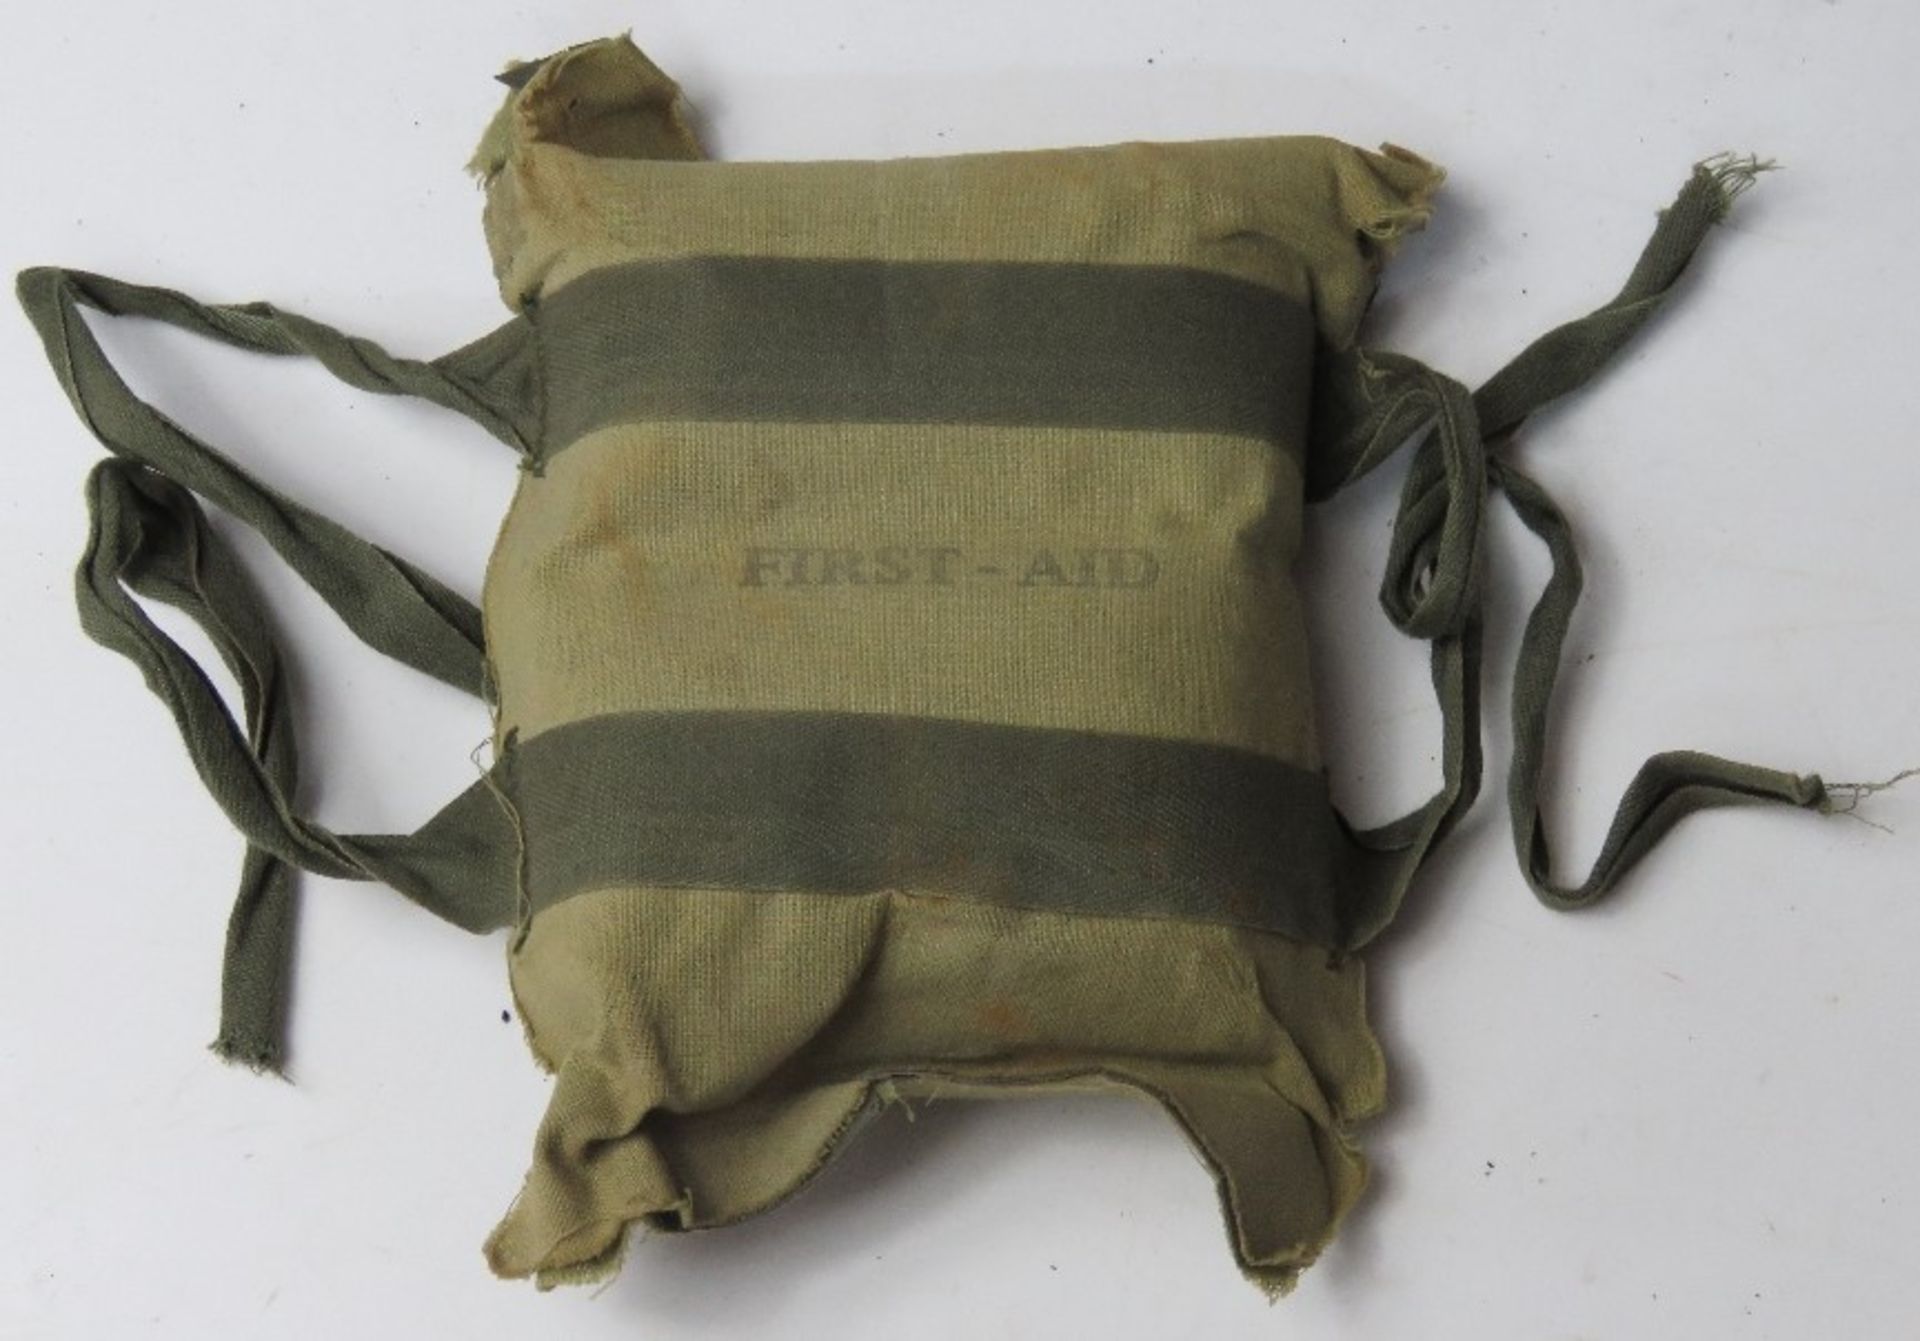 A WWII us airborne helmet first aid pouc